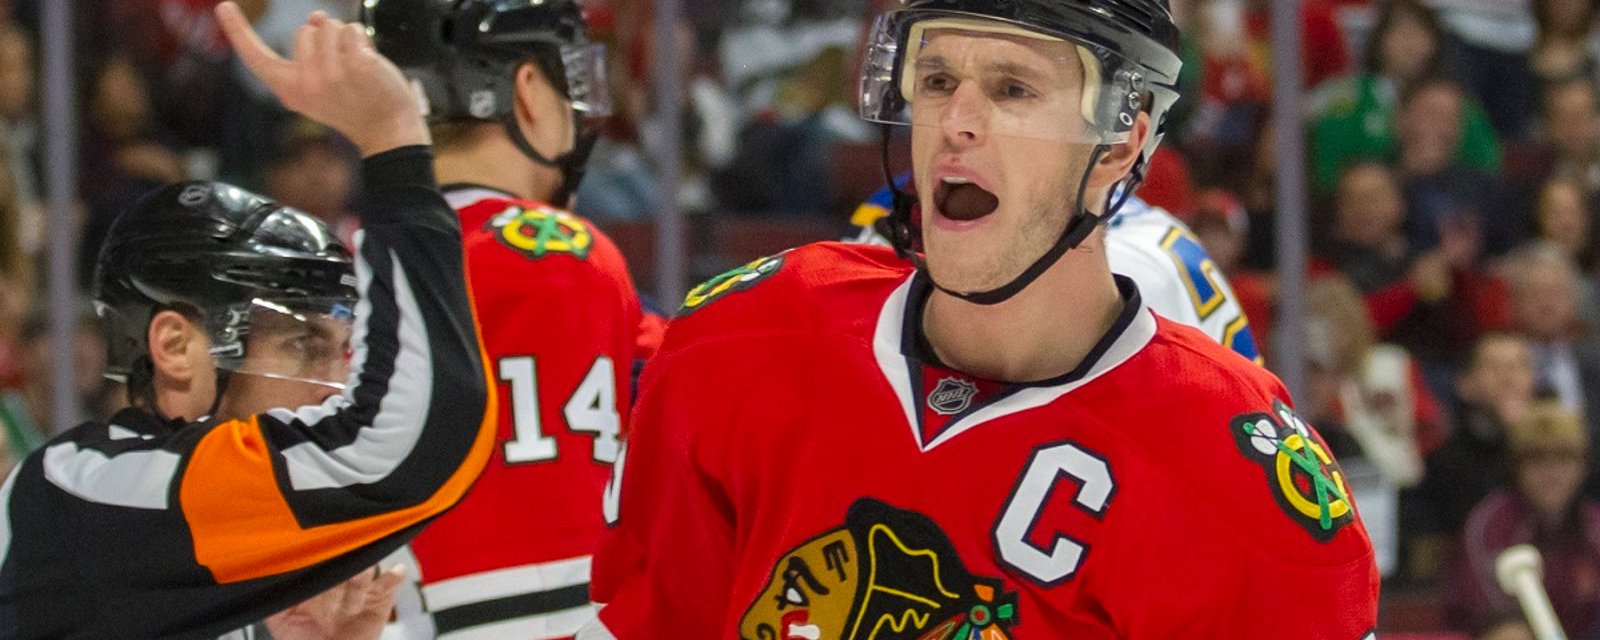 Breaking: Jonathan Toews appears to suffer minor injury in practice.